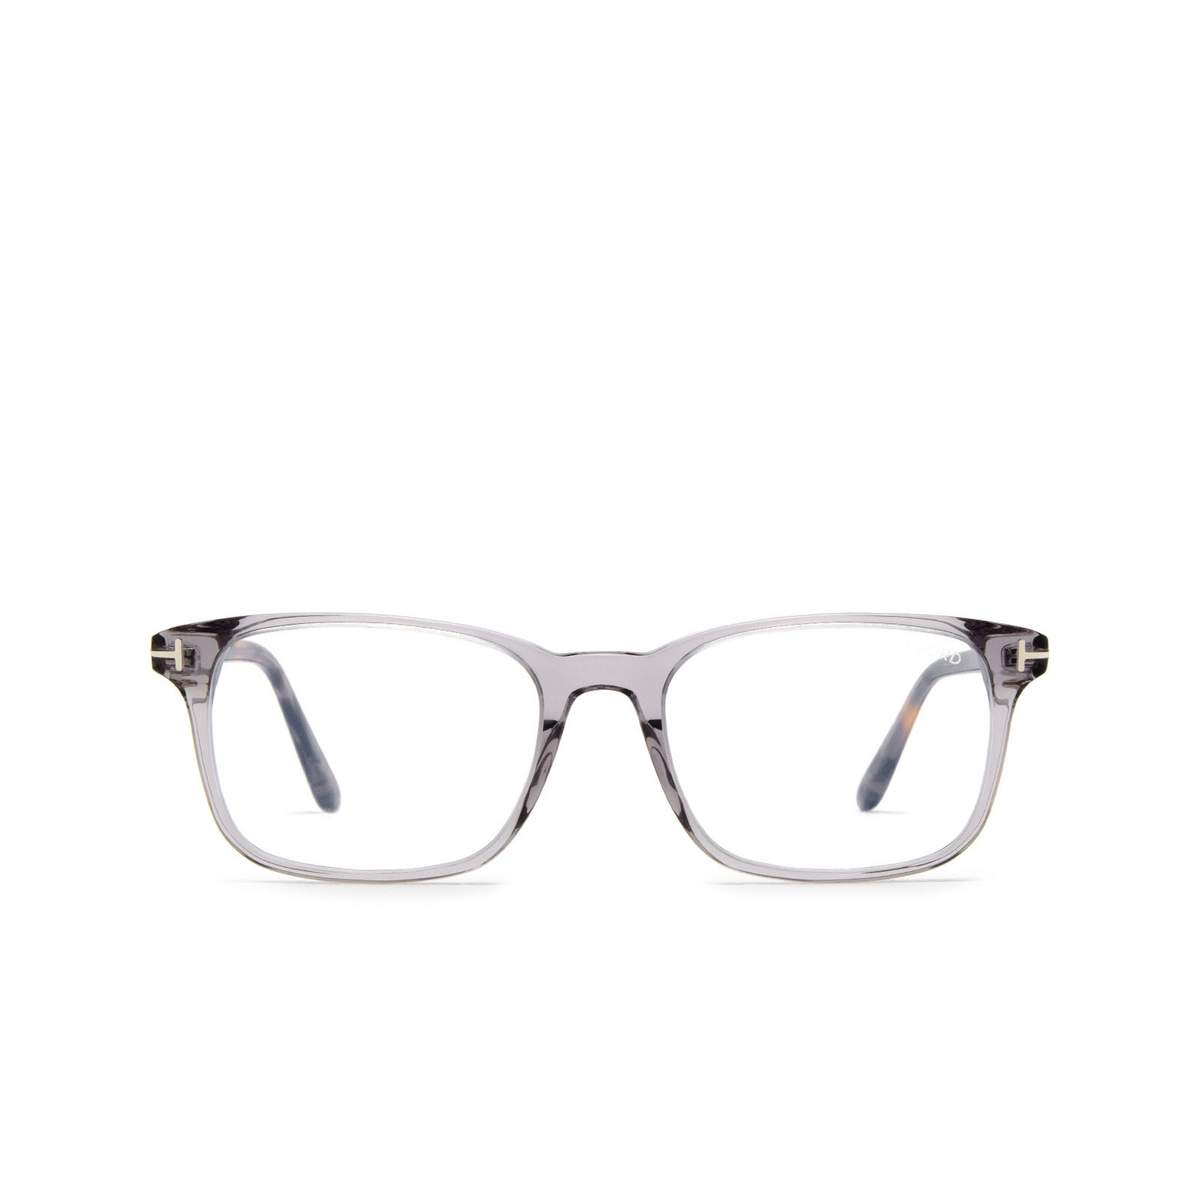 Tom Ford FT5831-B Eyeglasses 020 Grey - front view